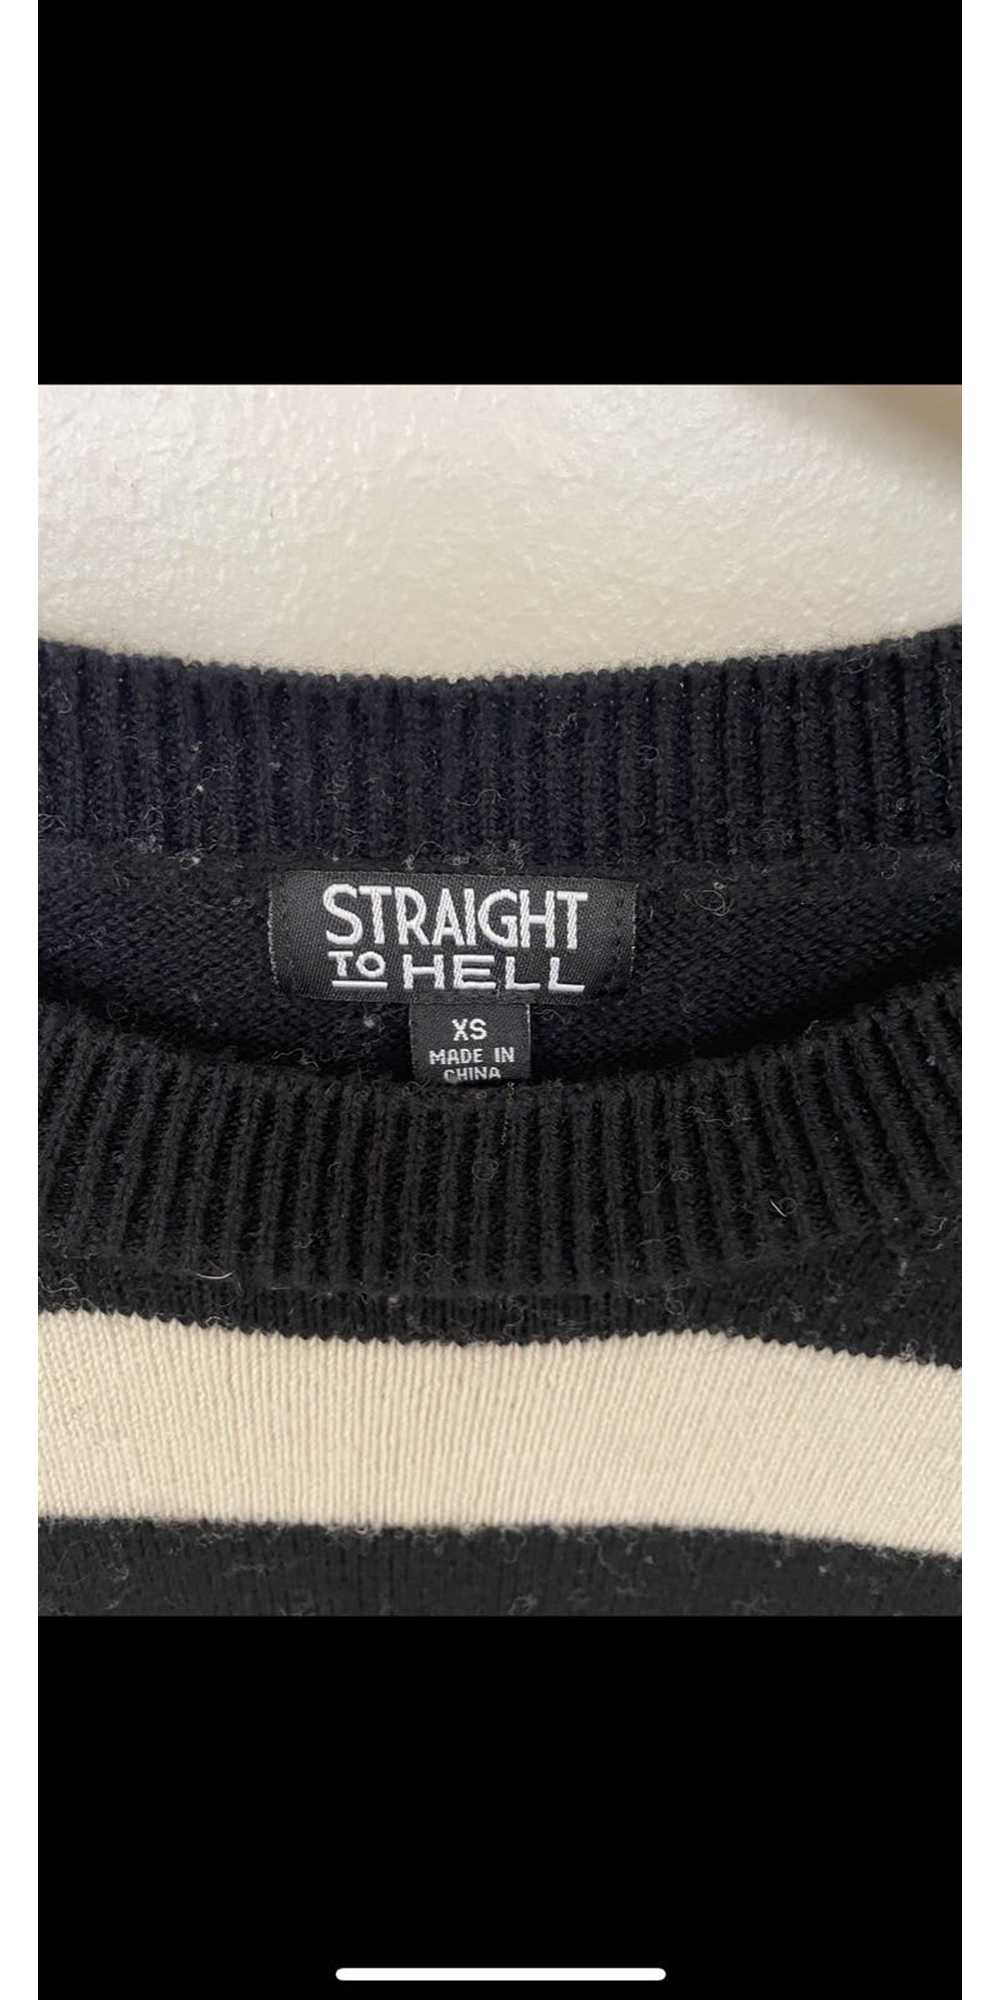 Straight To Hell Vagabond striped knit sweater - image 2